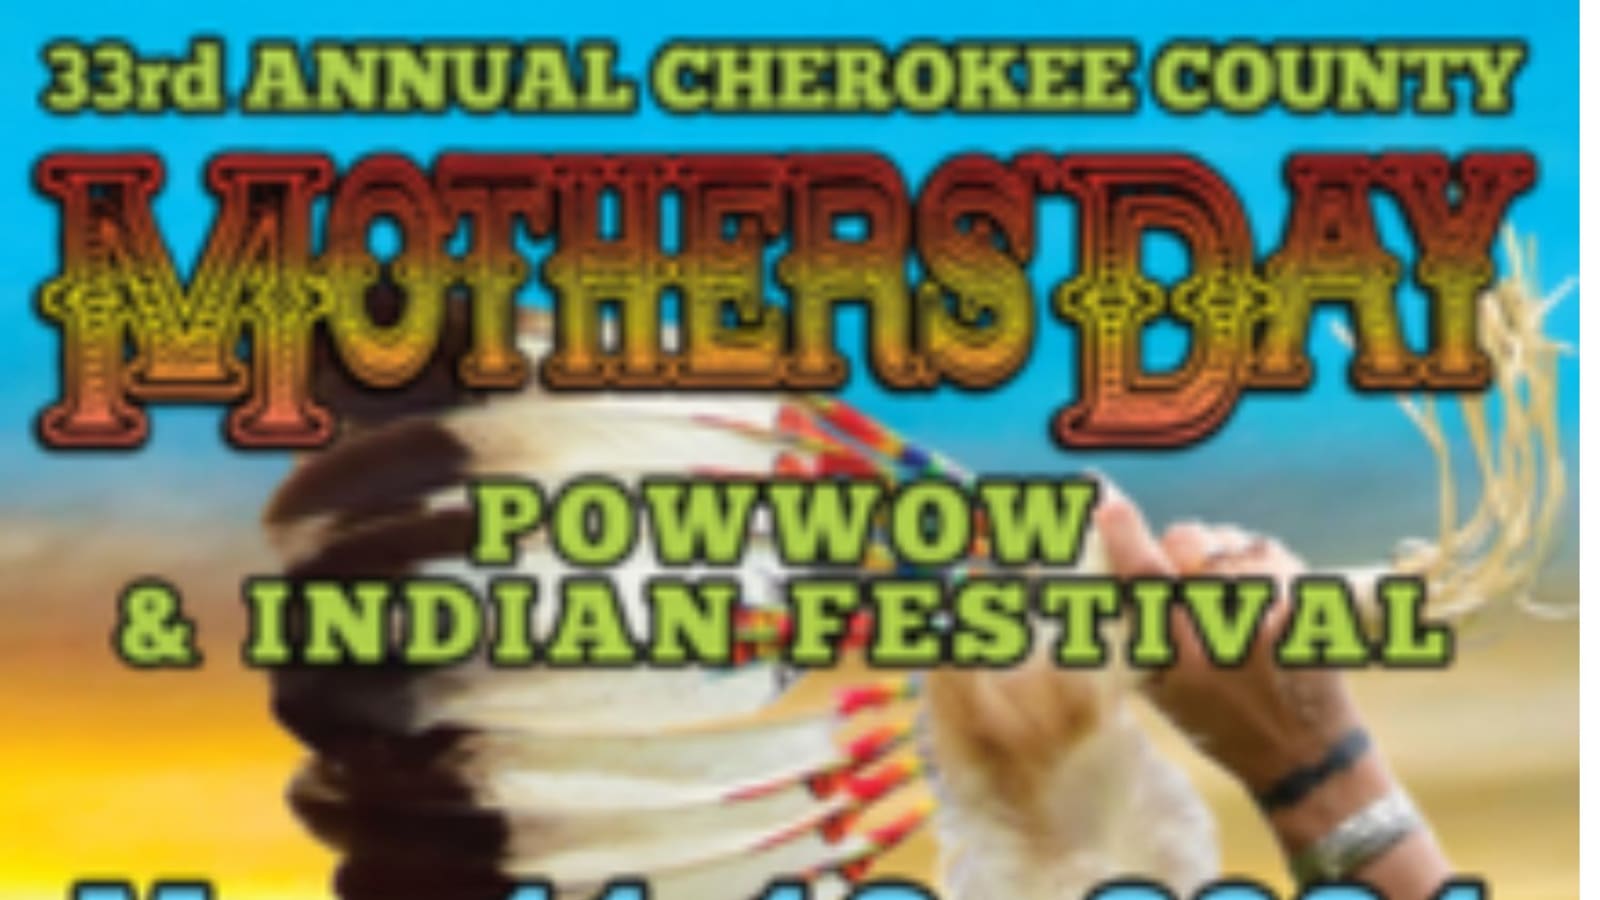 The 33rd Annual Cherokee County Indian Festival